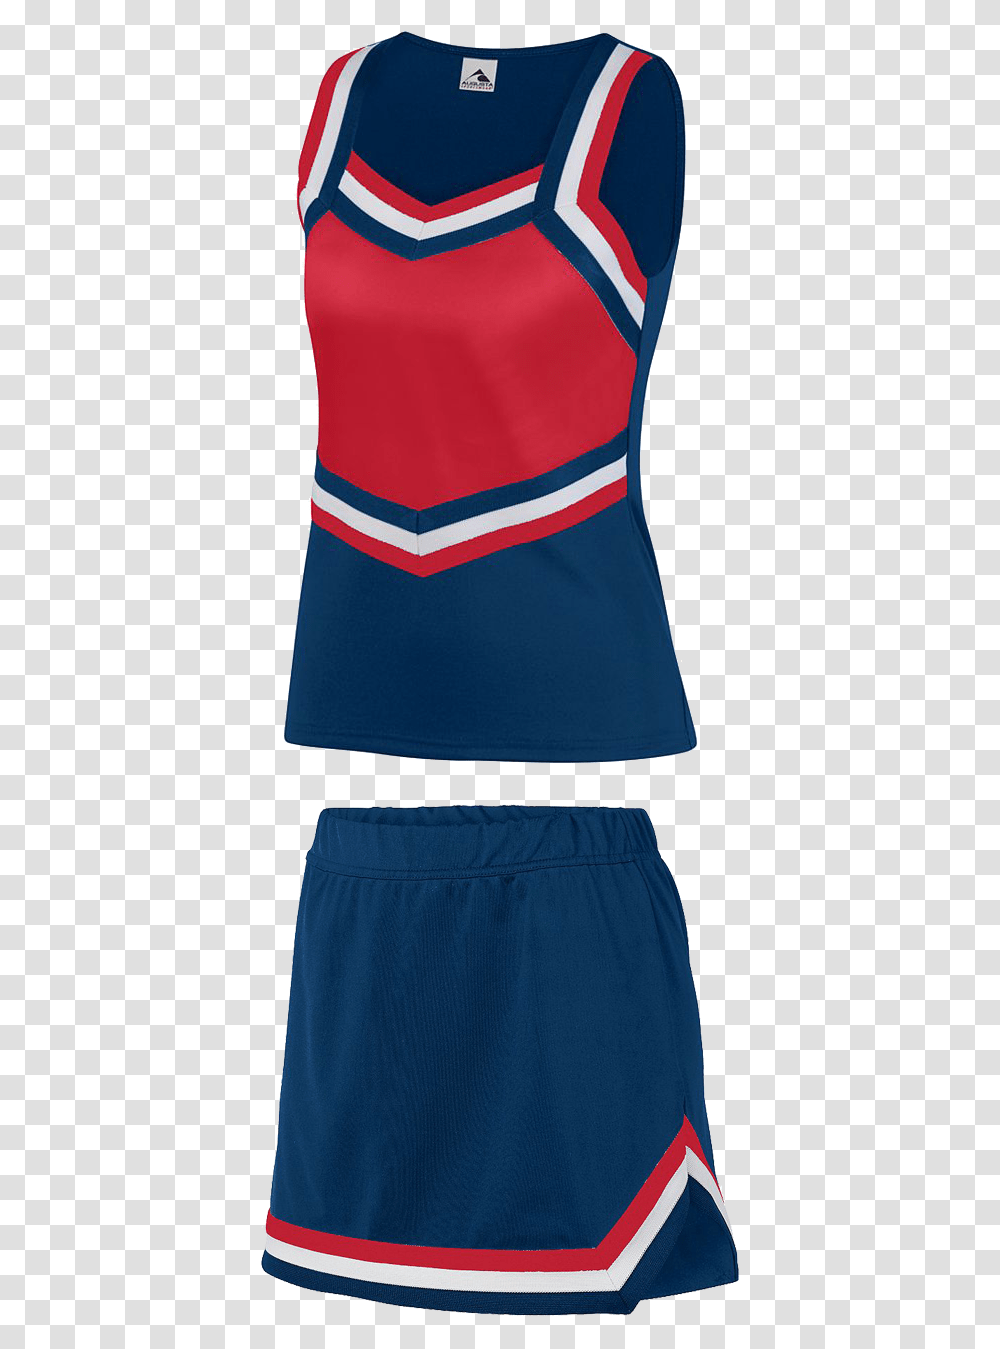 Black Red And White Cheerleading Uniforms, Shorts, Apparel, Skirt Transparent Png